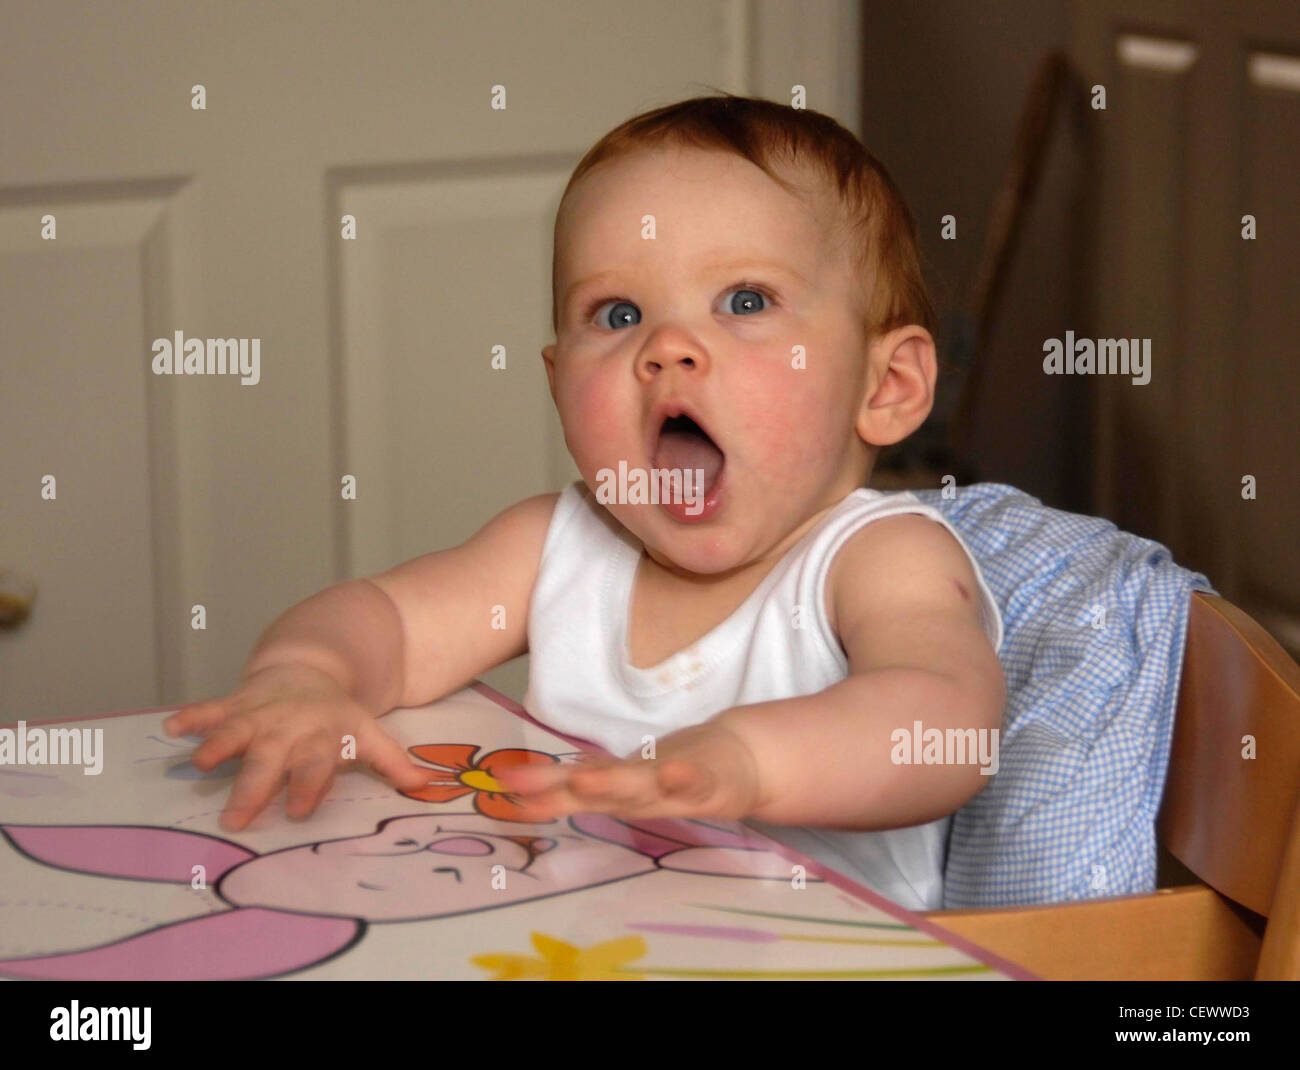 Female child sitting wearing white vest sitting in wooden highchair at table arms in the air and mouth open Stock Photo